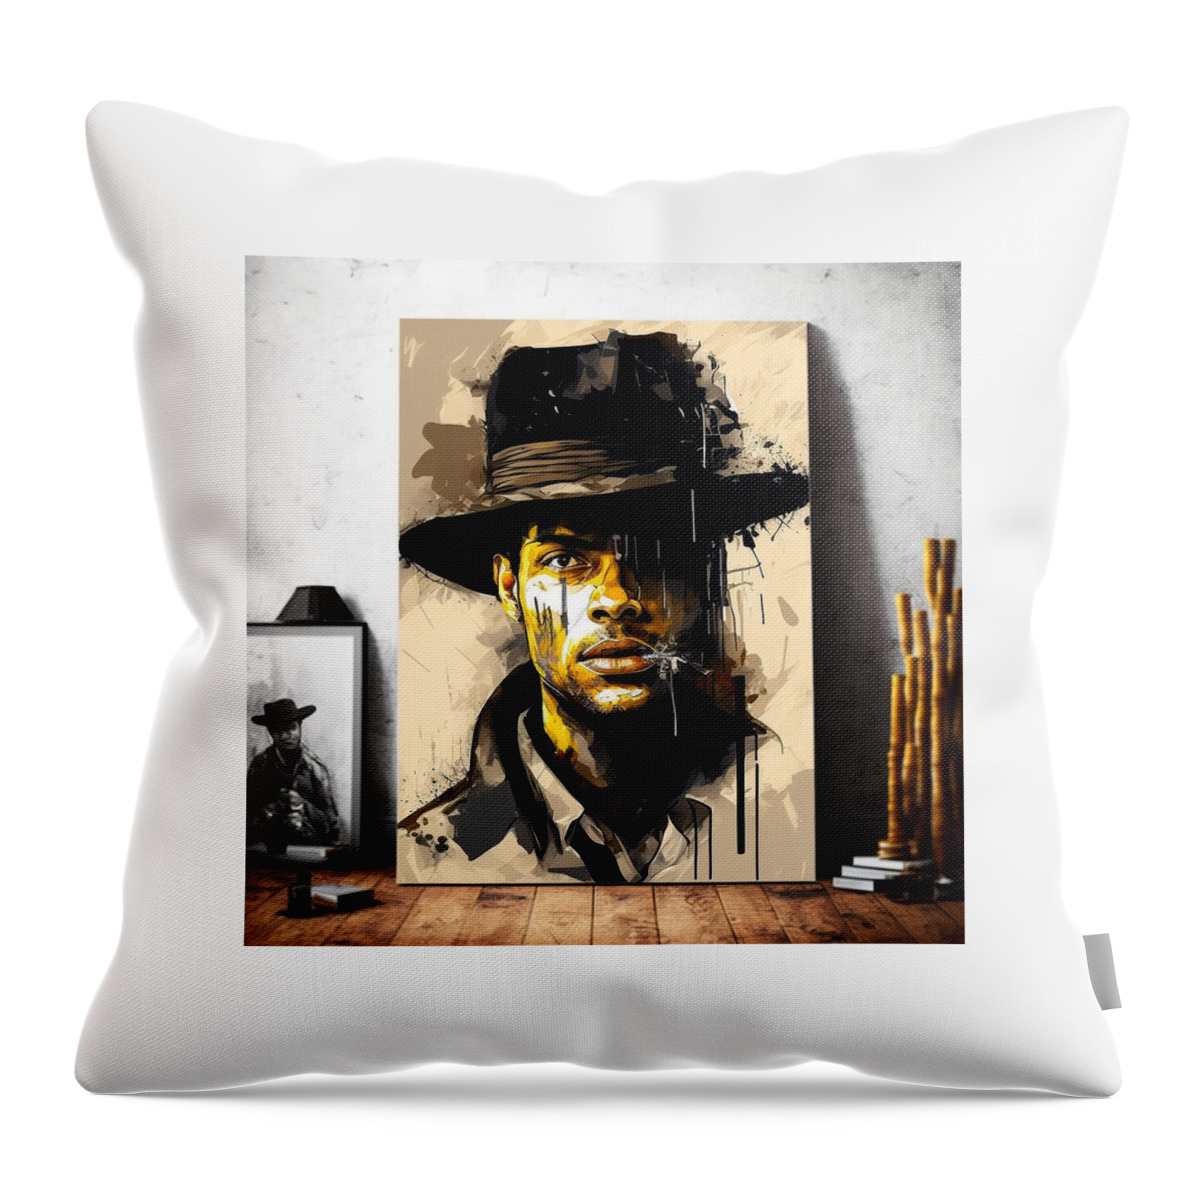 Abstract Indiana Jones Painting Background Jean Art Throw Pillow featuring the painting abstract indiana Jones painting background Jean 6450effd7d 043c9645563 645043e645 b9645563a by Celestial Images